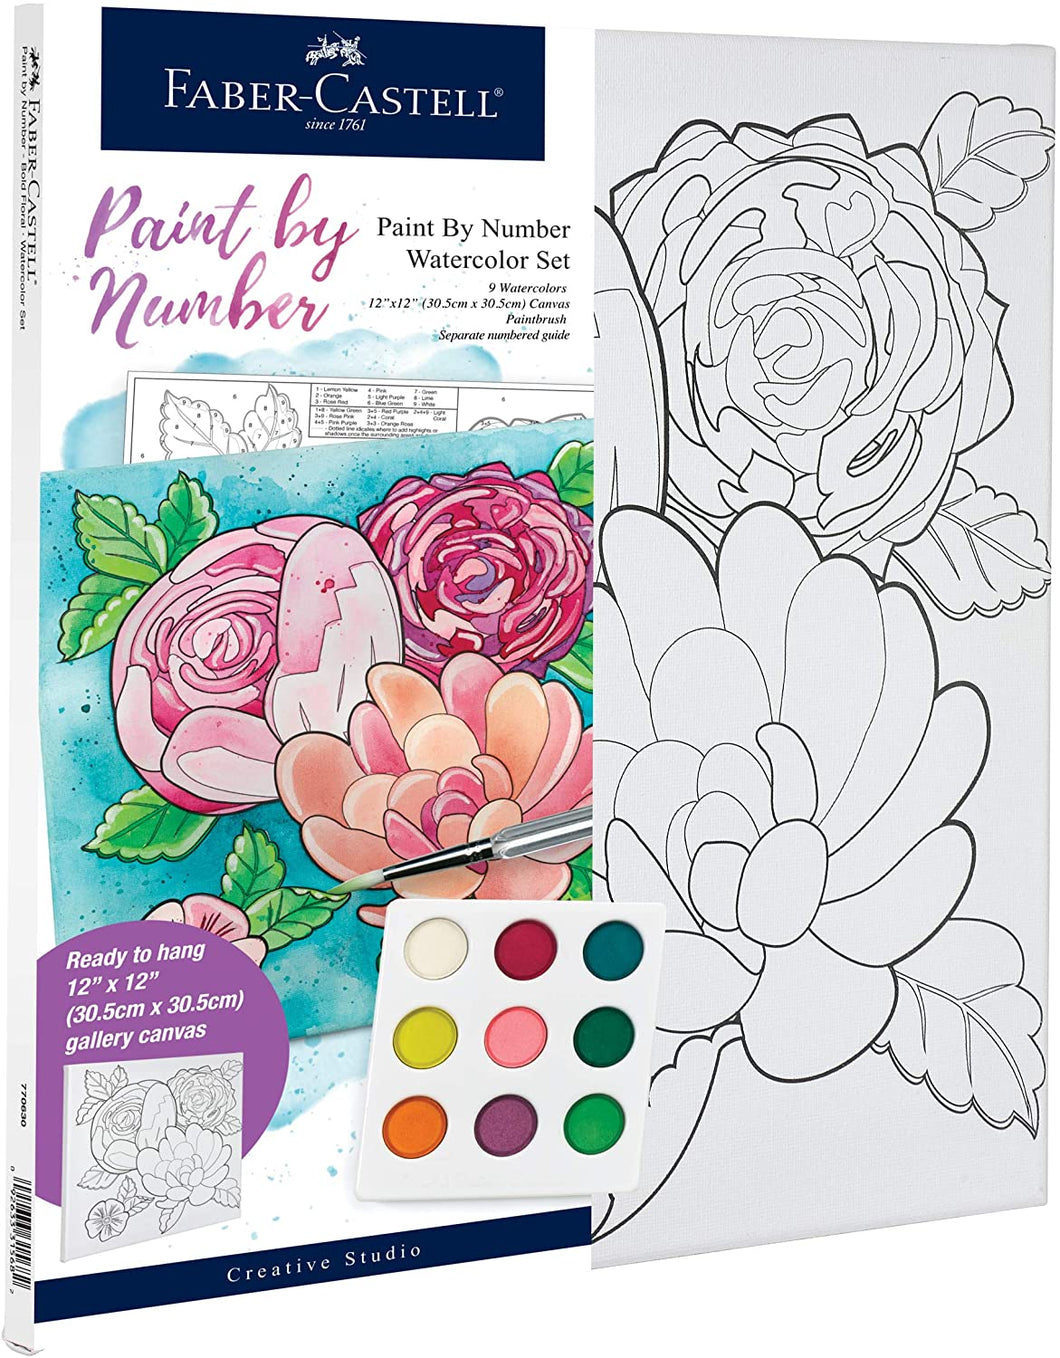 Faber-Castell Paint by Number Watercolor Bold Floral - Adult Paint by Number Kit on Canvas - DIY Flower Painting